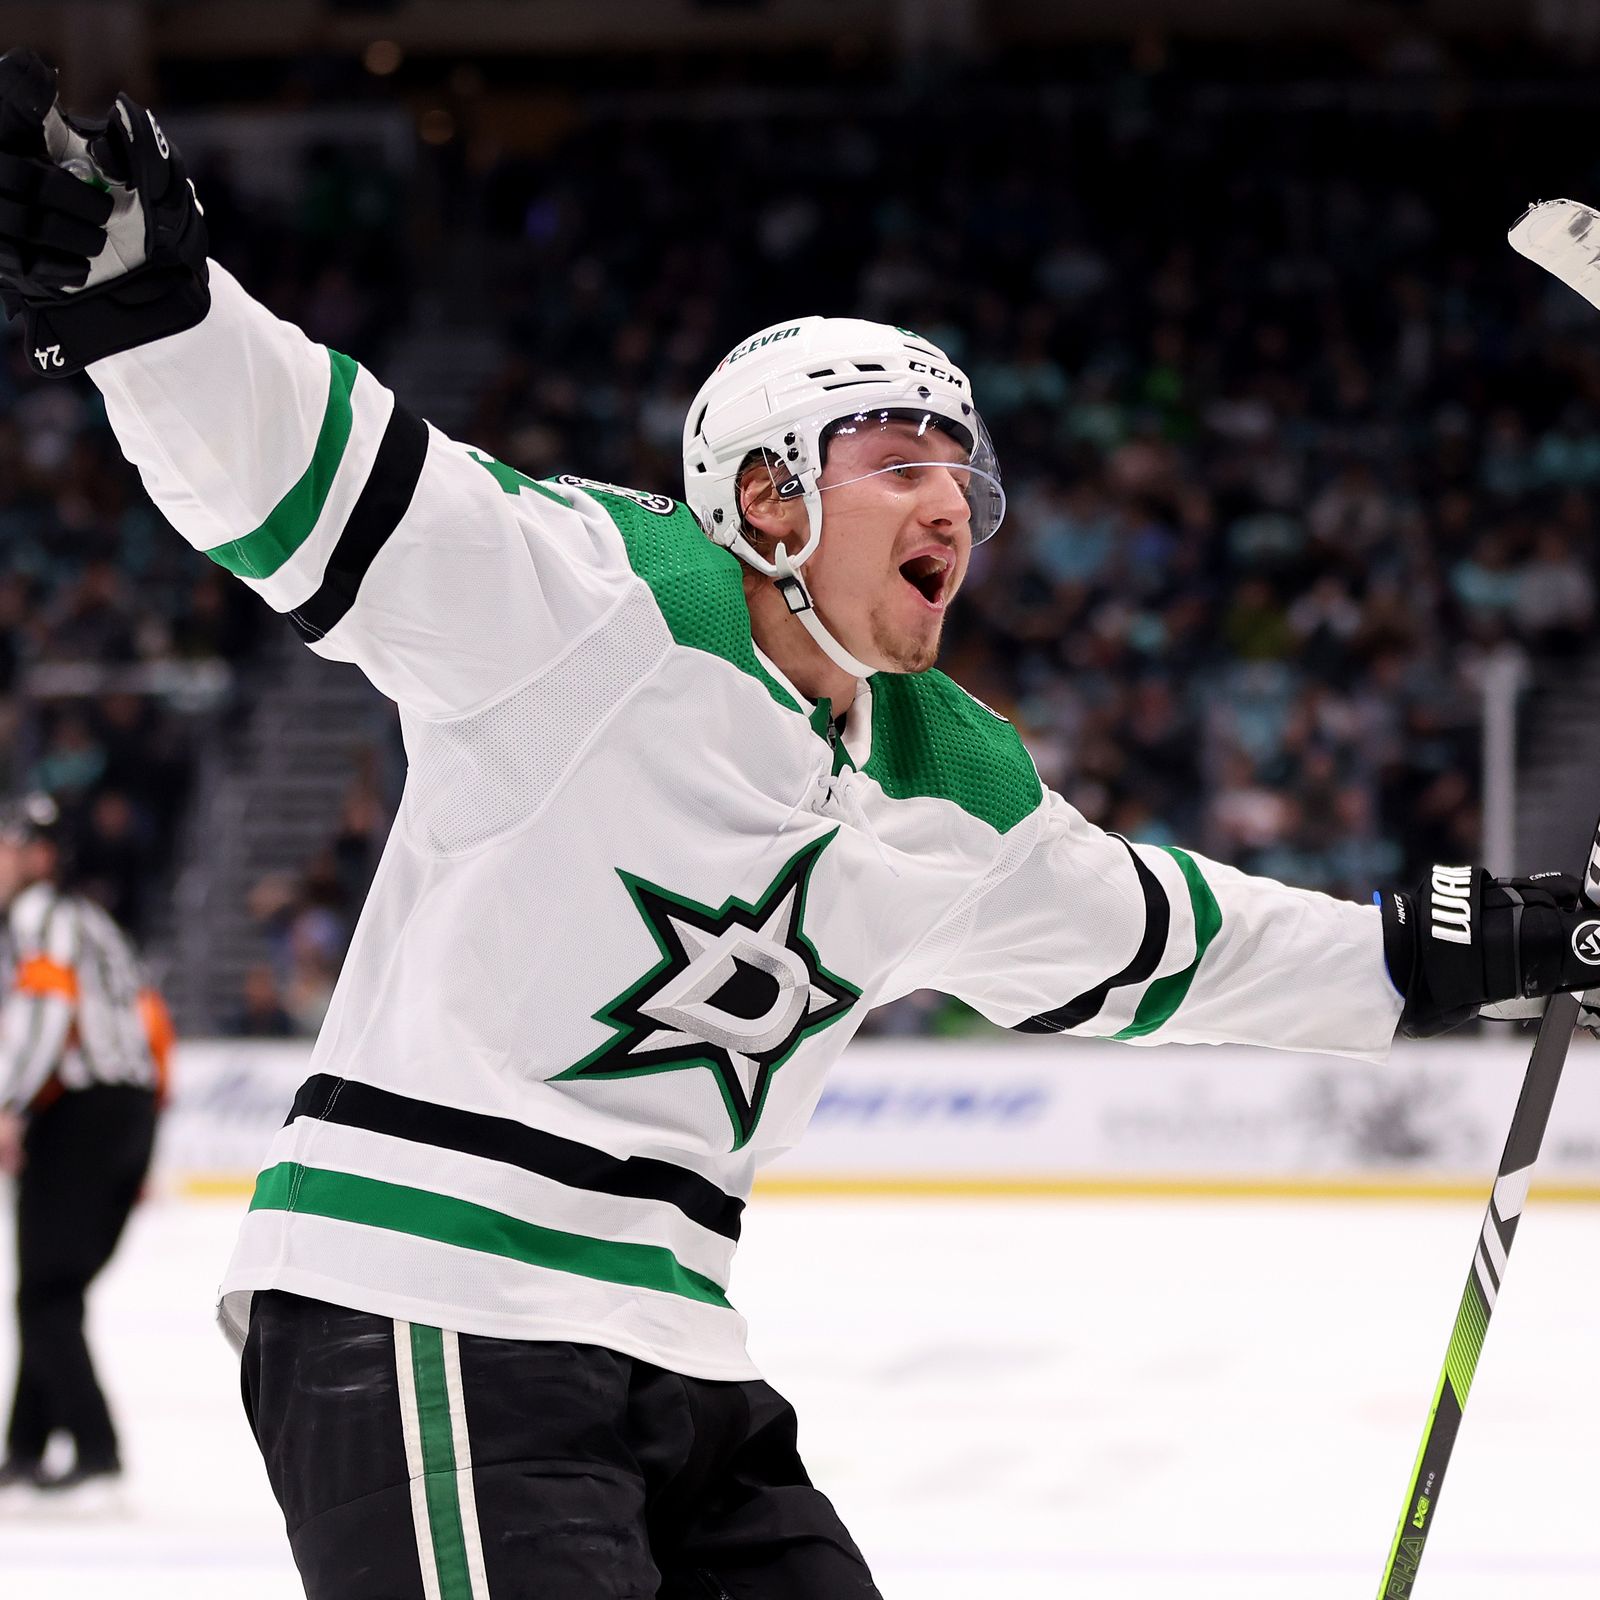 Dallas Stars secured the Western Conference Final